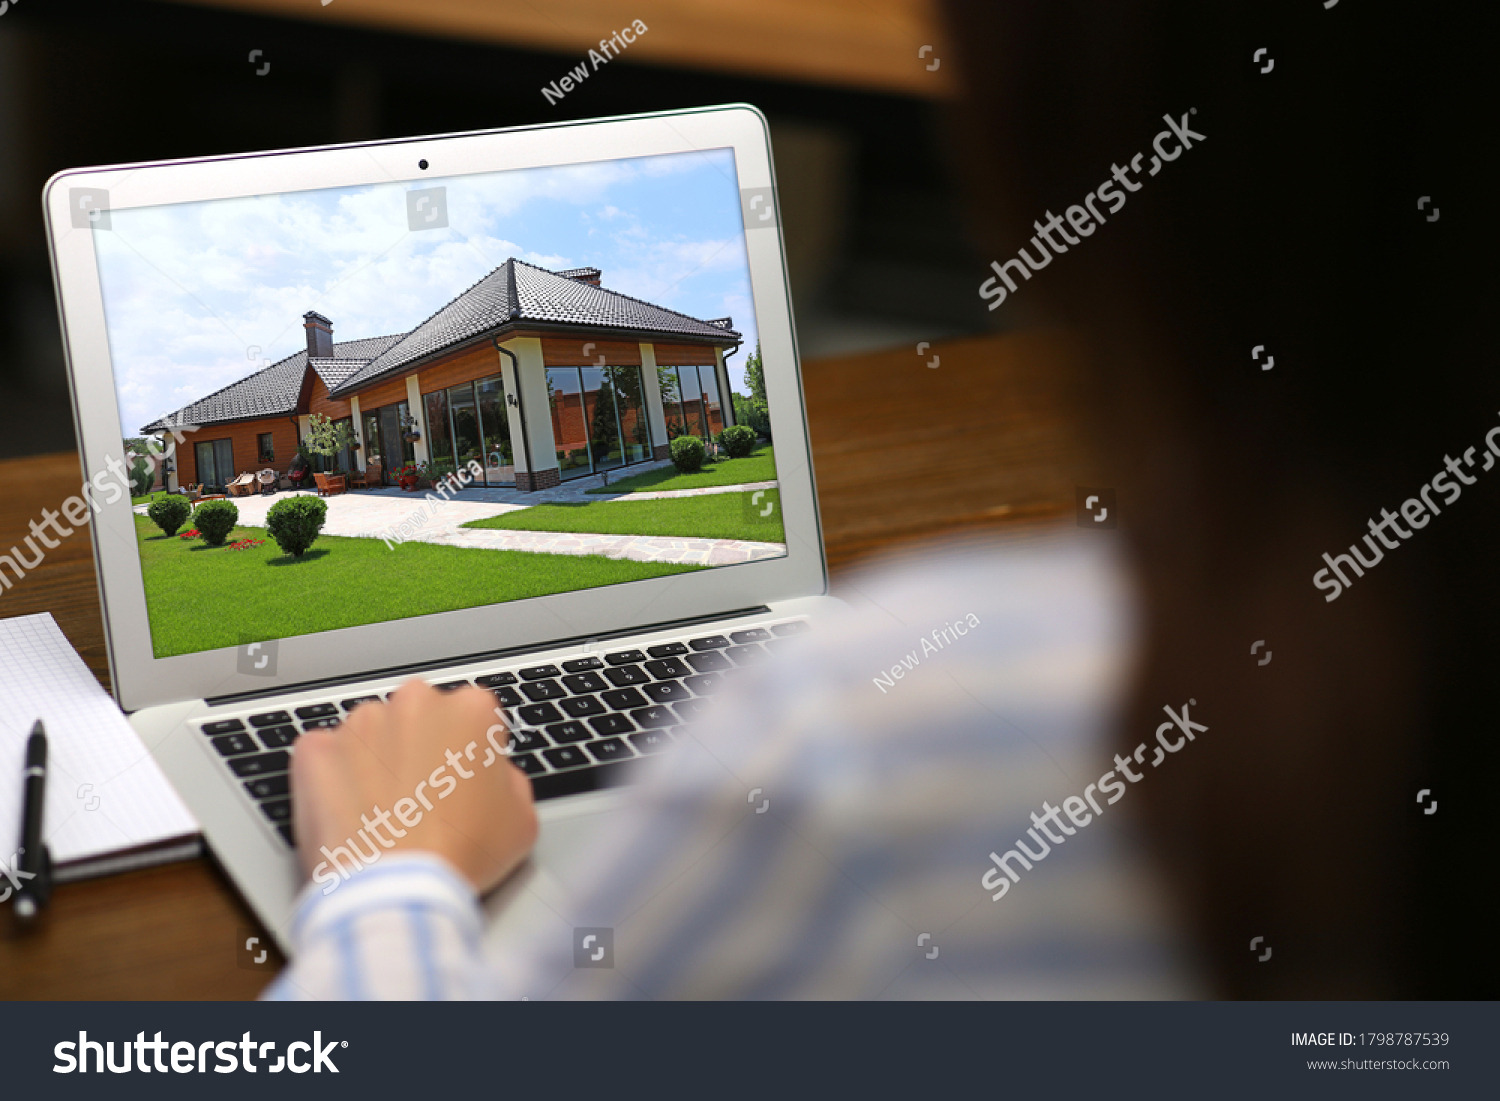 Woman choosing new house online using laptop or real estate agent working at table, closeup #1798787539